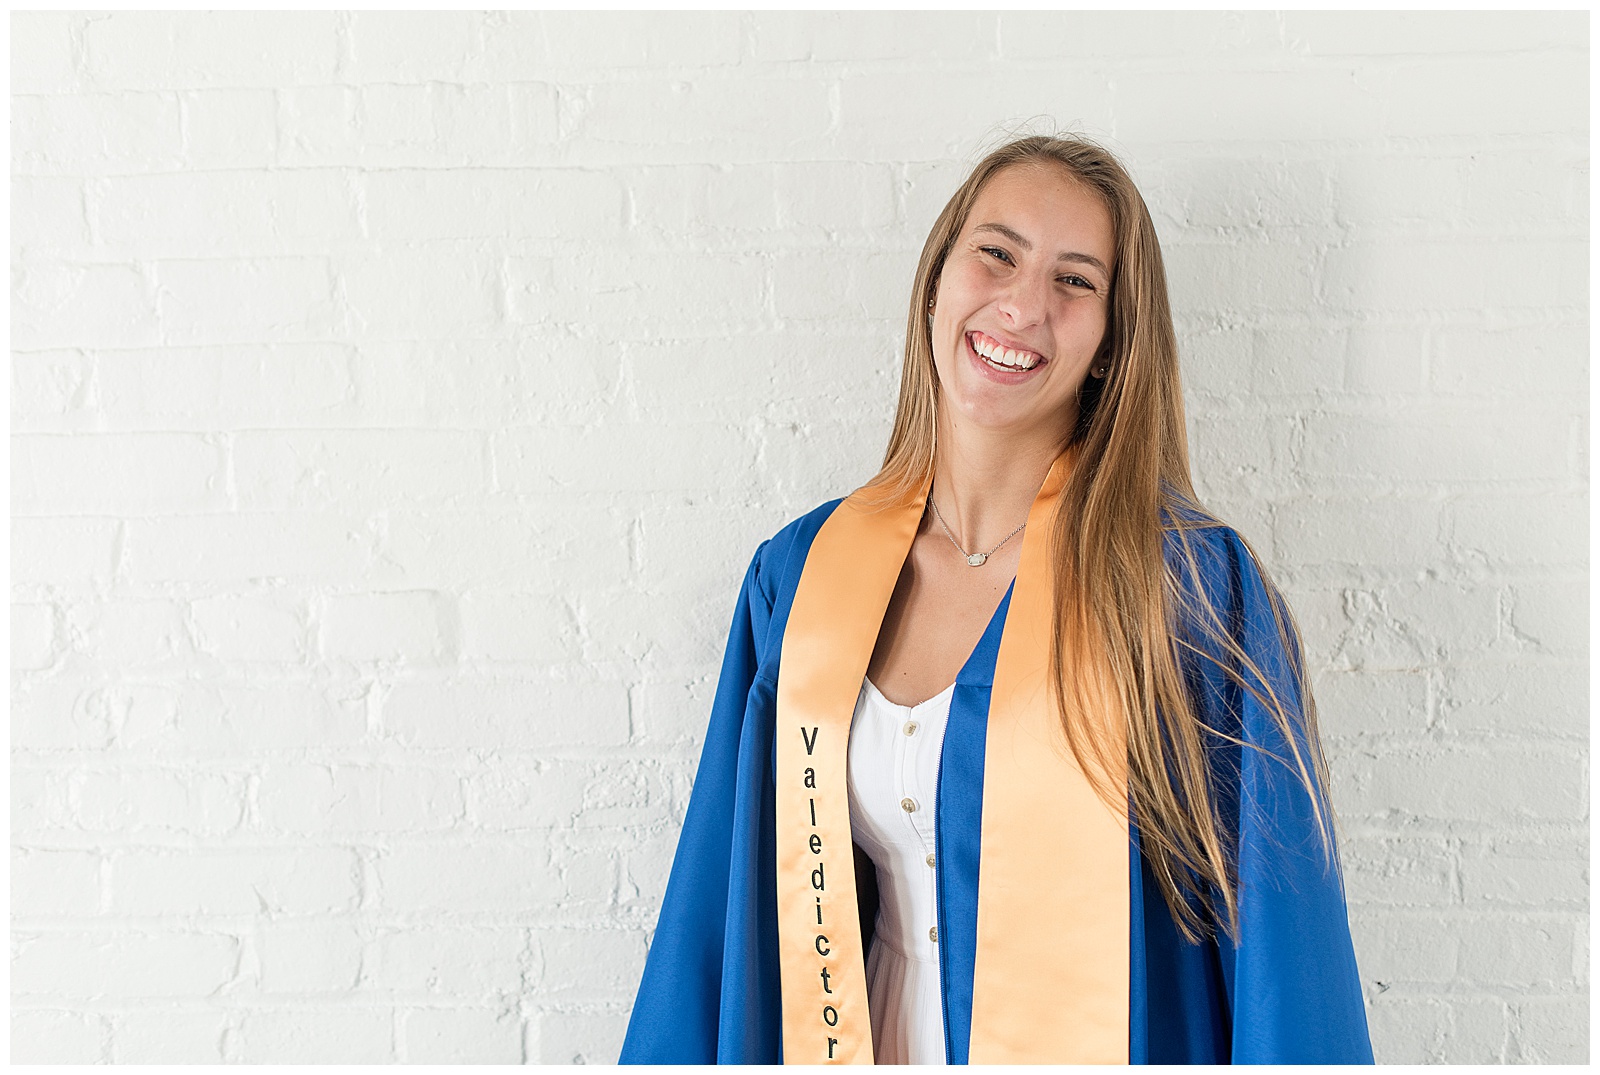 senior laughing at camera with blue graduation gown on